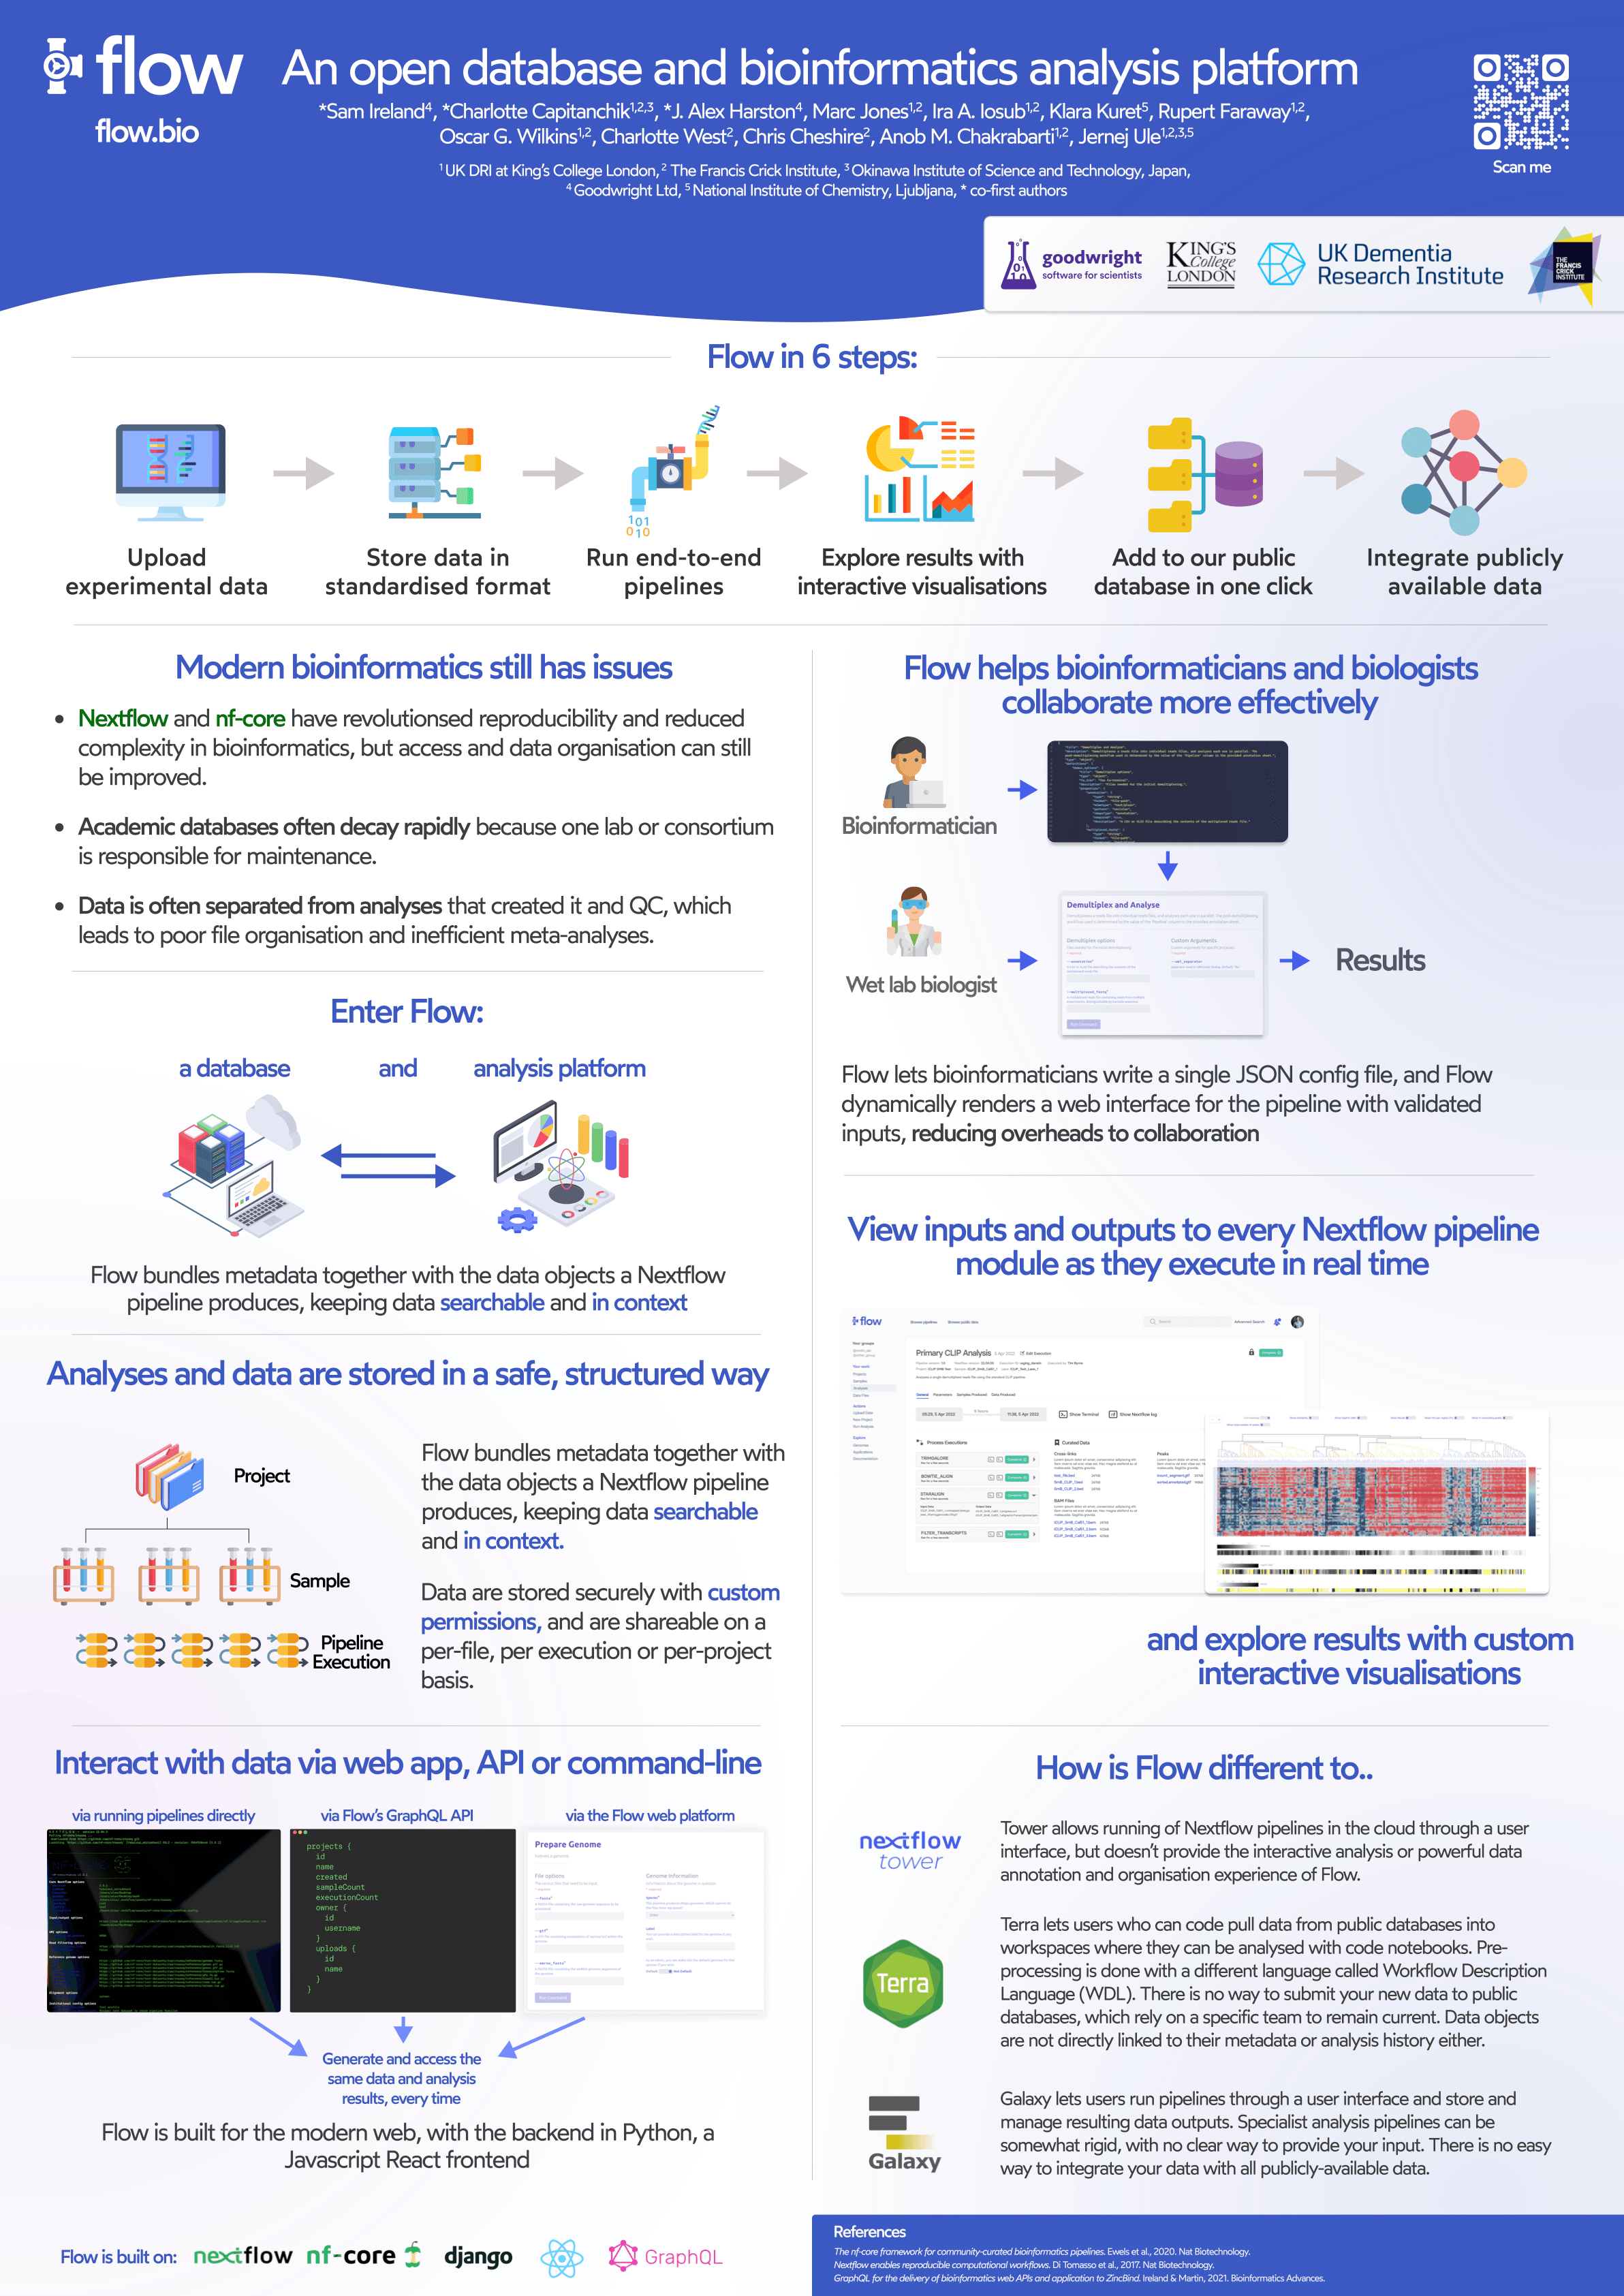 Flow - The Open, Nextflow-Based, Sequencing Analysis Platform